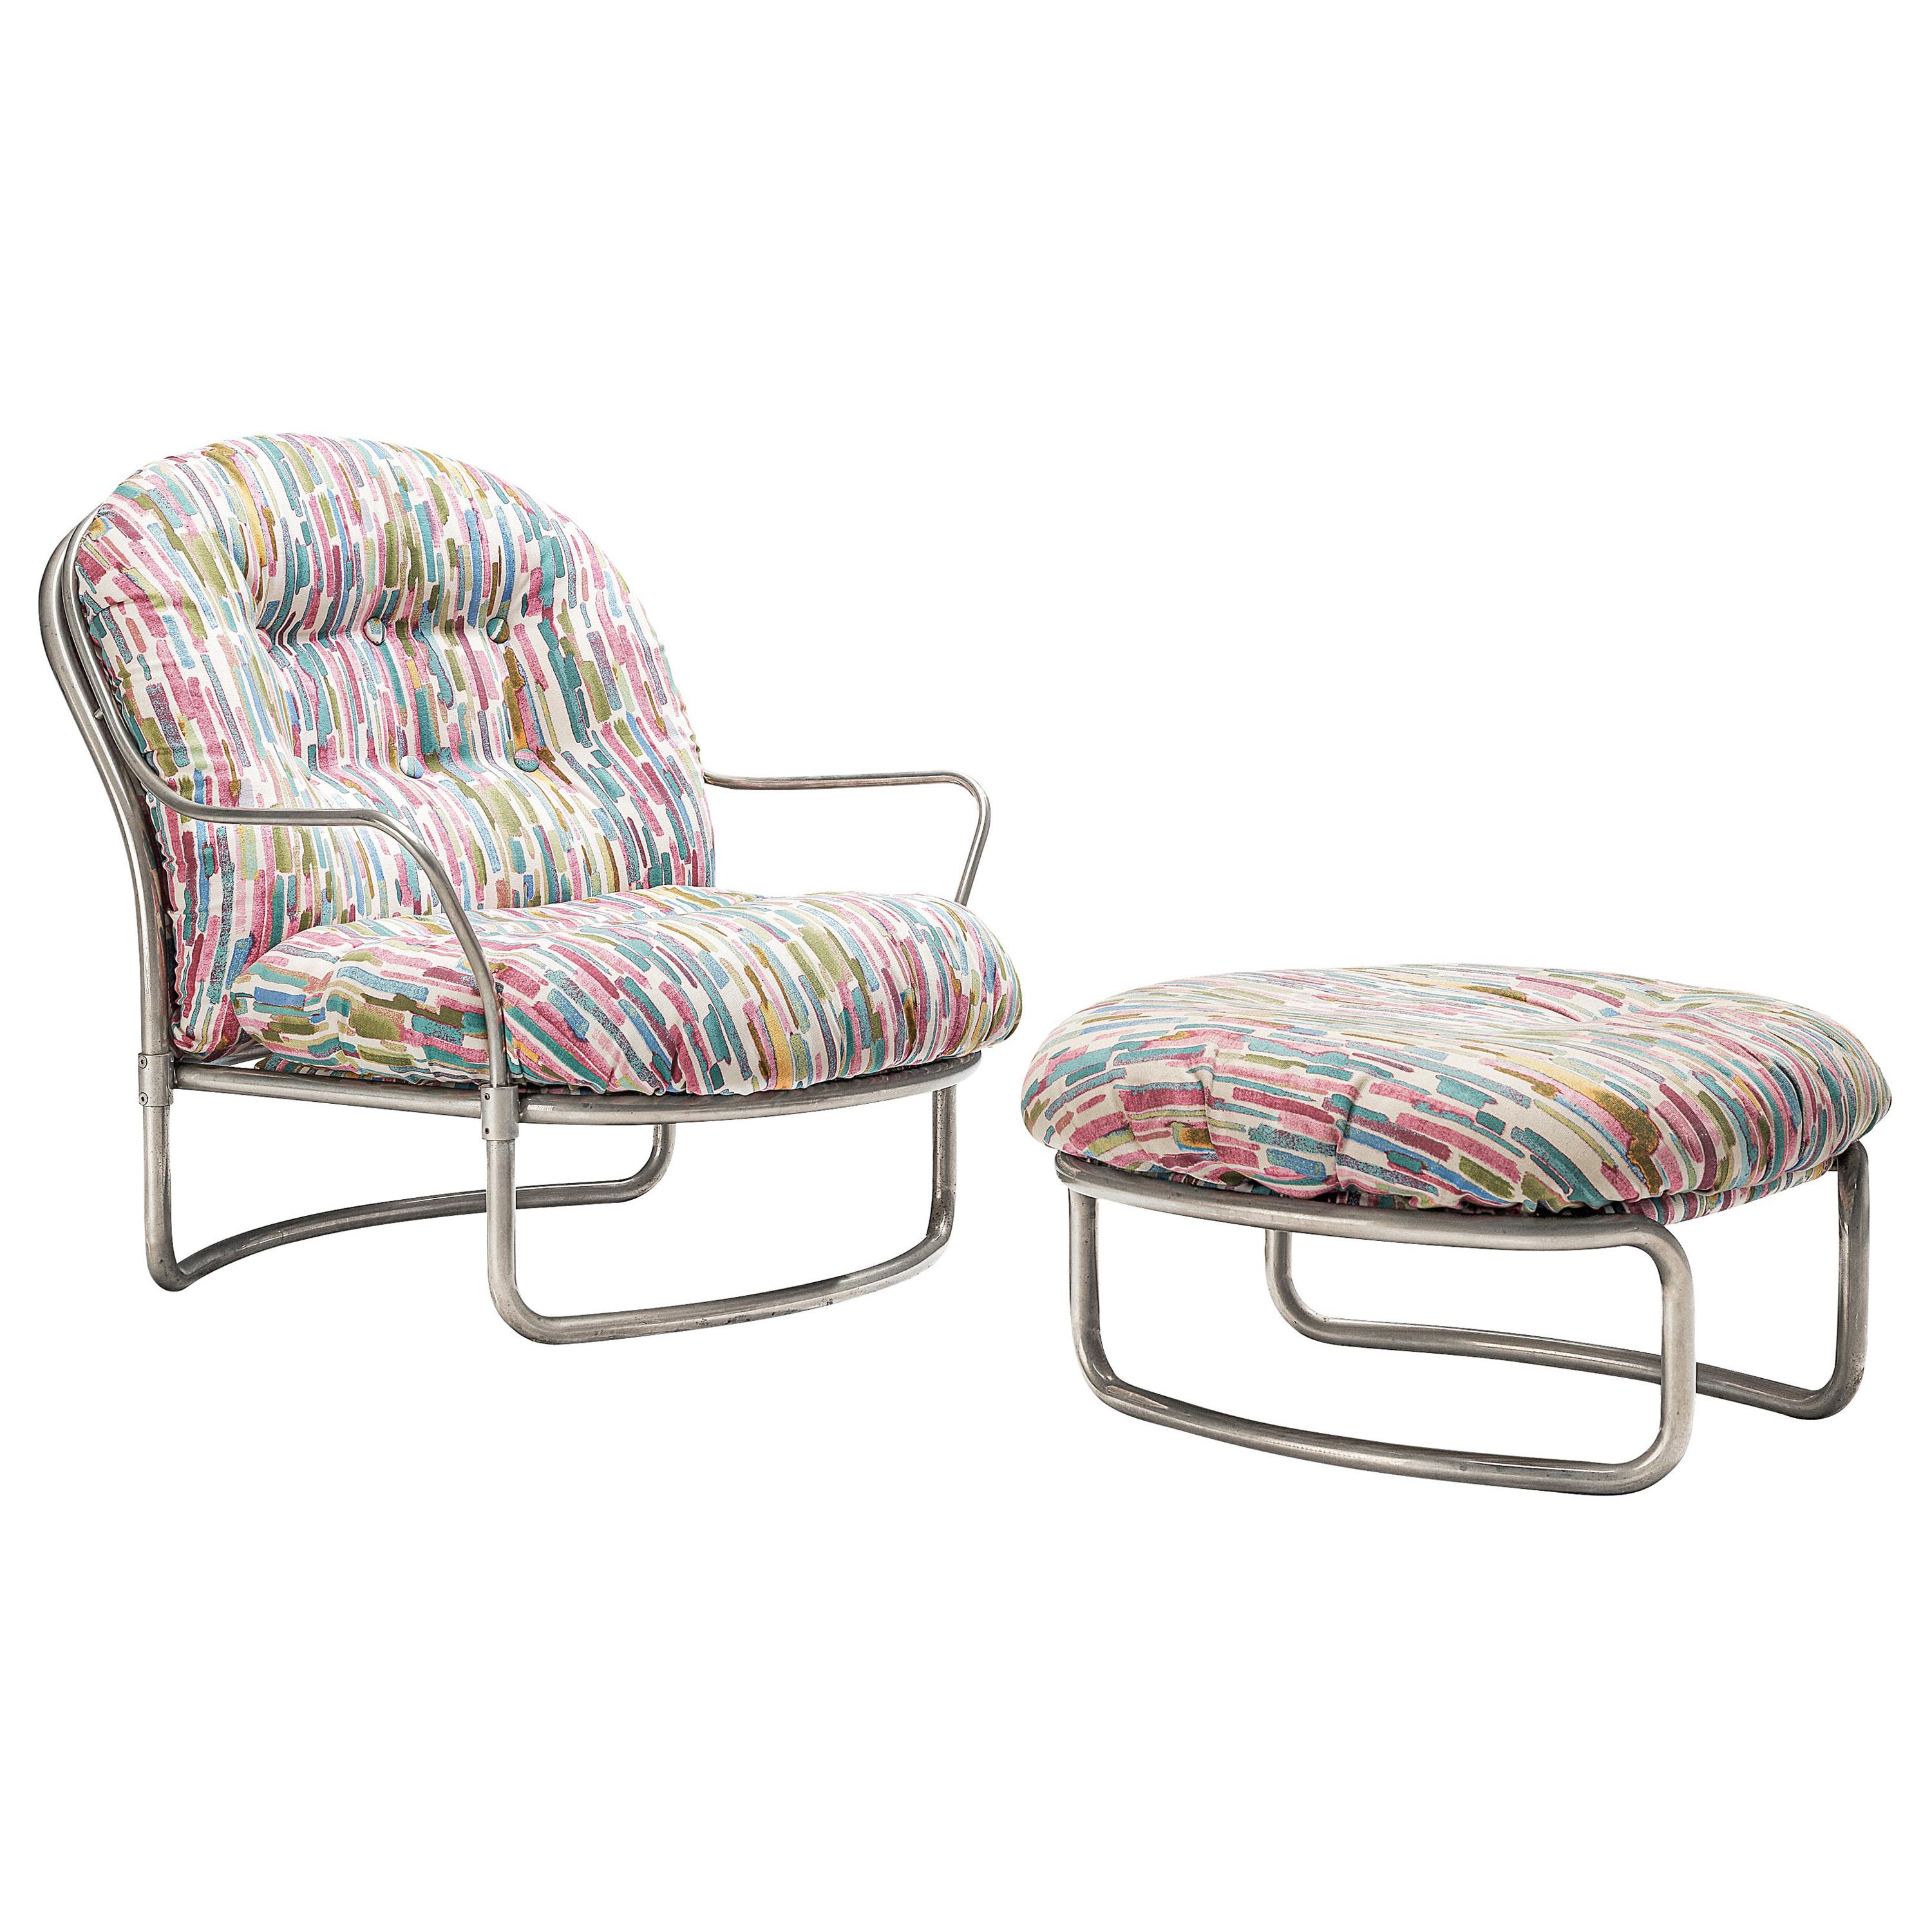 Carlo de Carli Lounge Chair with Ottoman in Colorful Upholstery